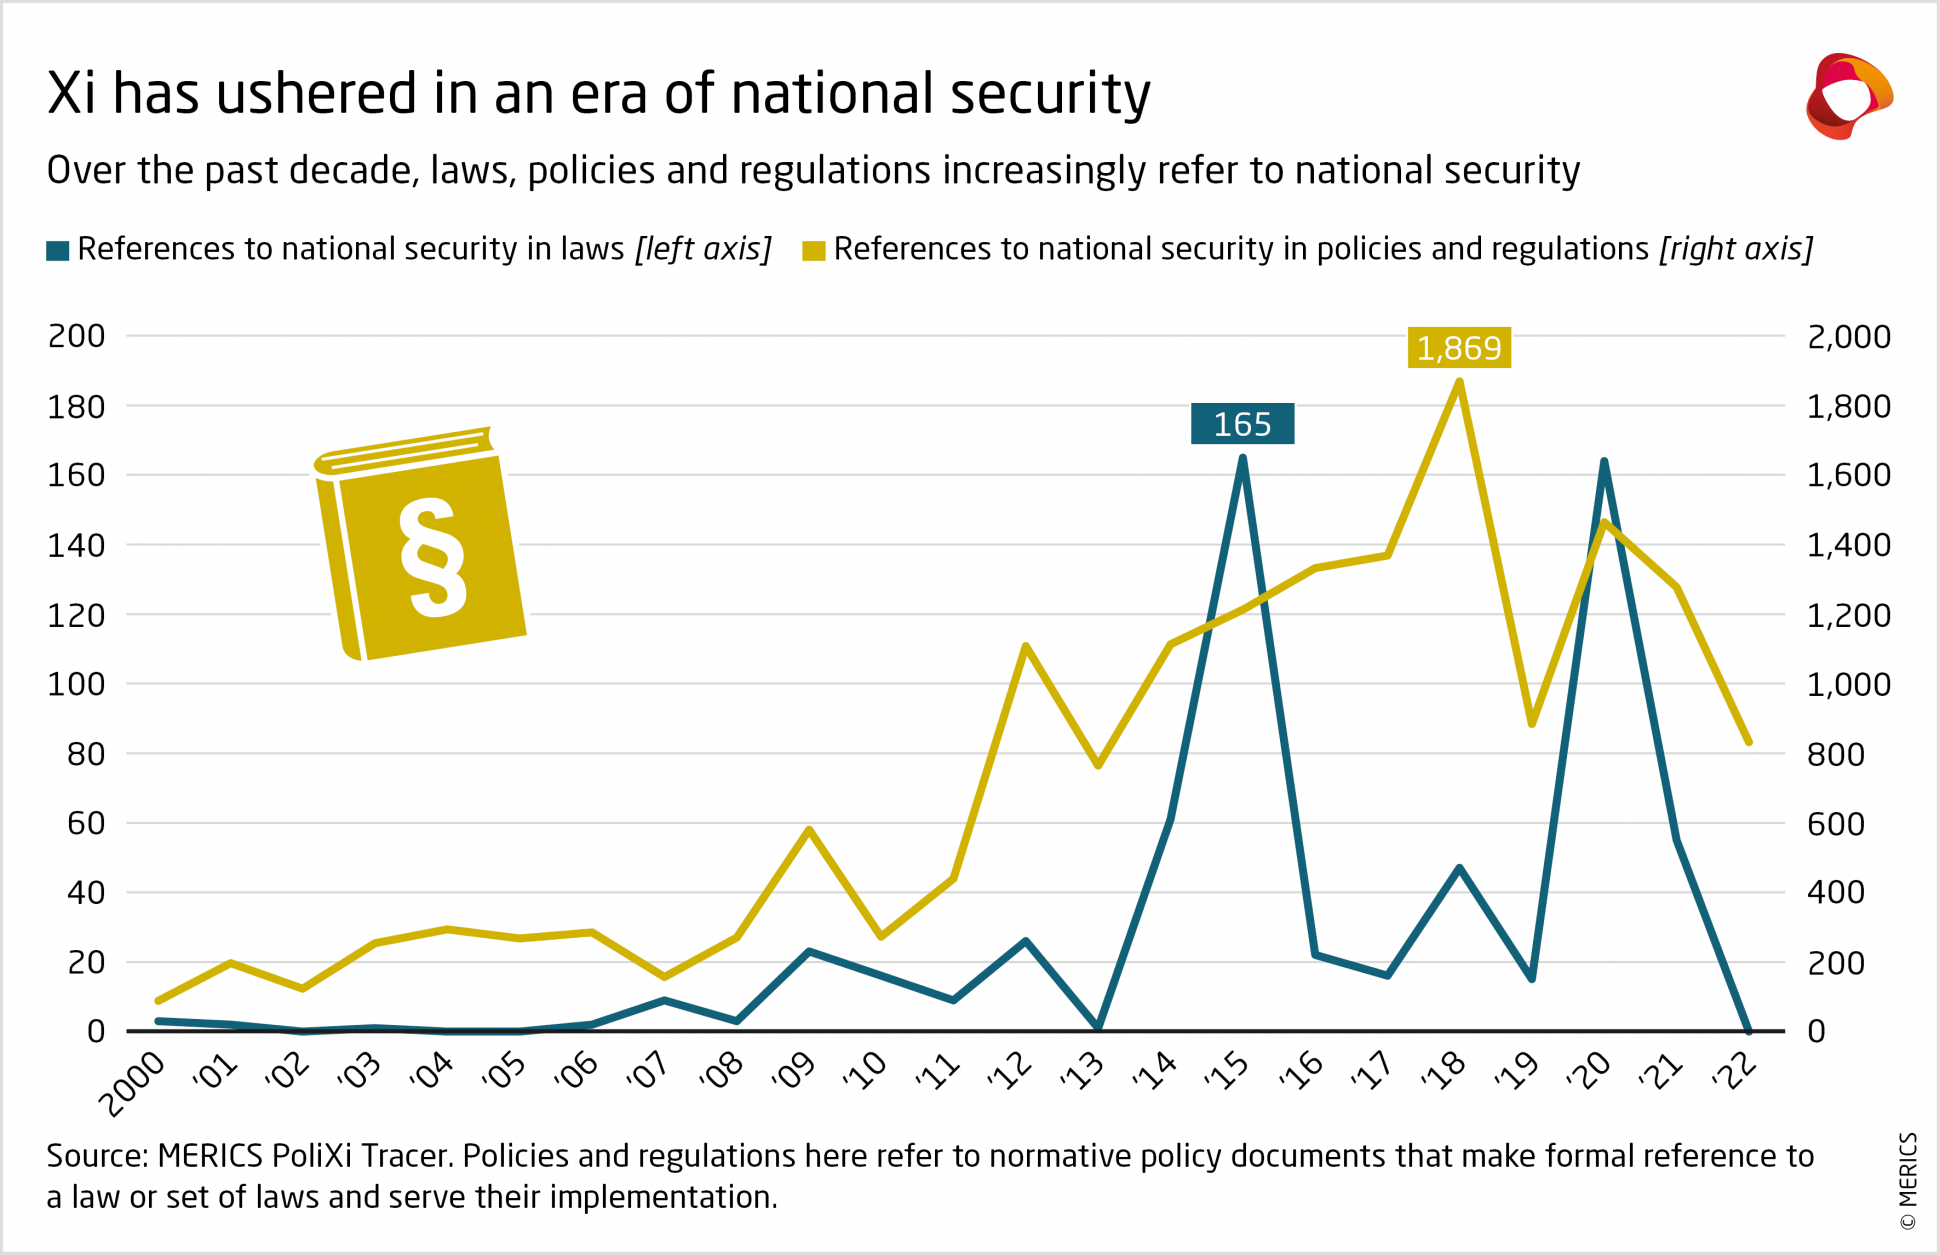 MERICS-China-Monitor-National-Security-Laws-policies-and-regulations-increasingly-refer-to-national-security-Exhibit-3